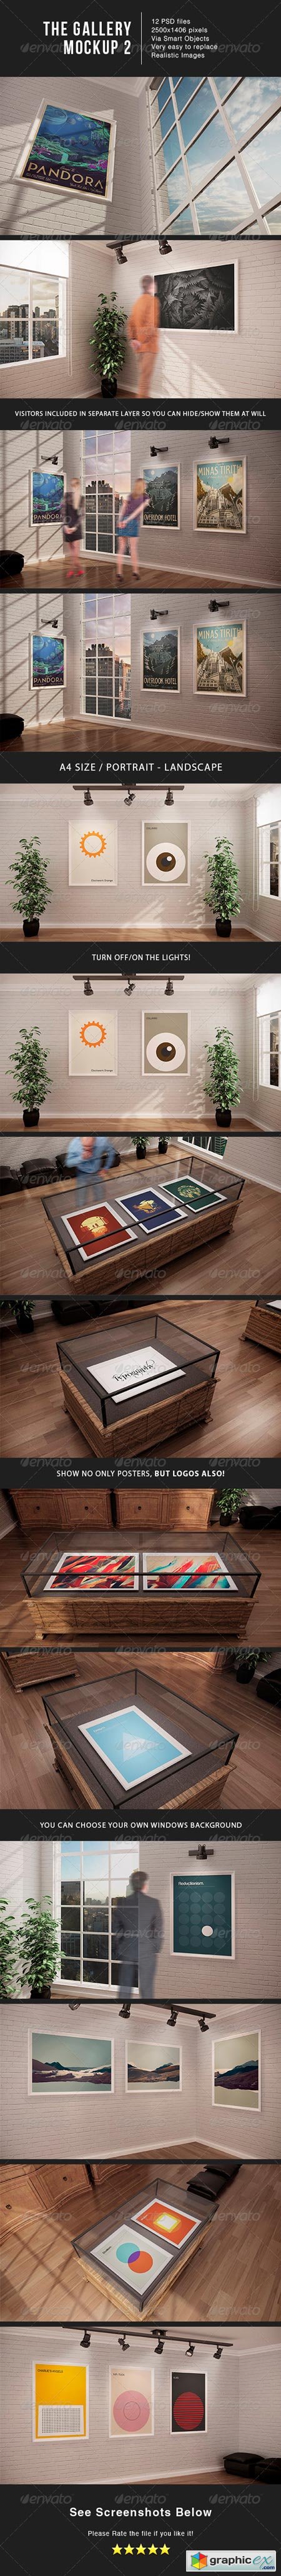 The Gallery MockUp 2 6538953